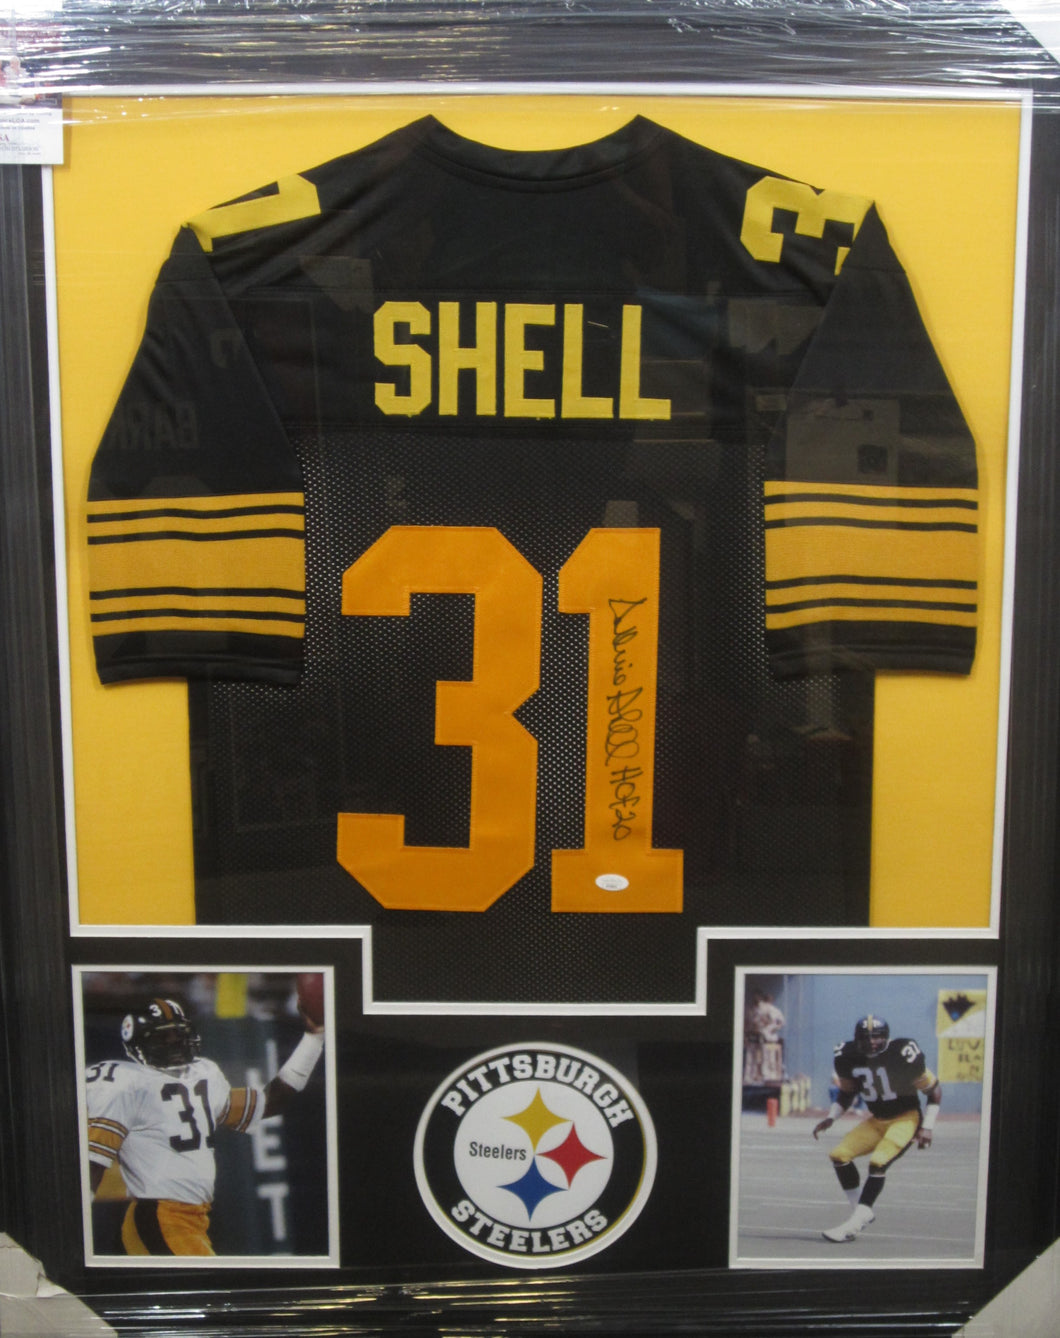 Pittsburgh Steelers Donnie Shell Signed Jersey with HOF 20 Inscription Framed & Matted with JSA COA